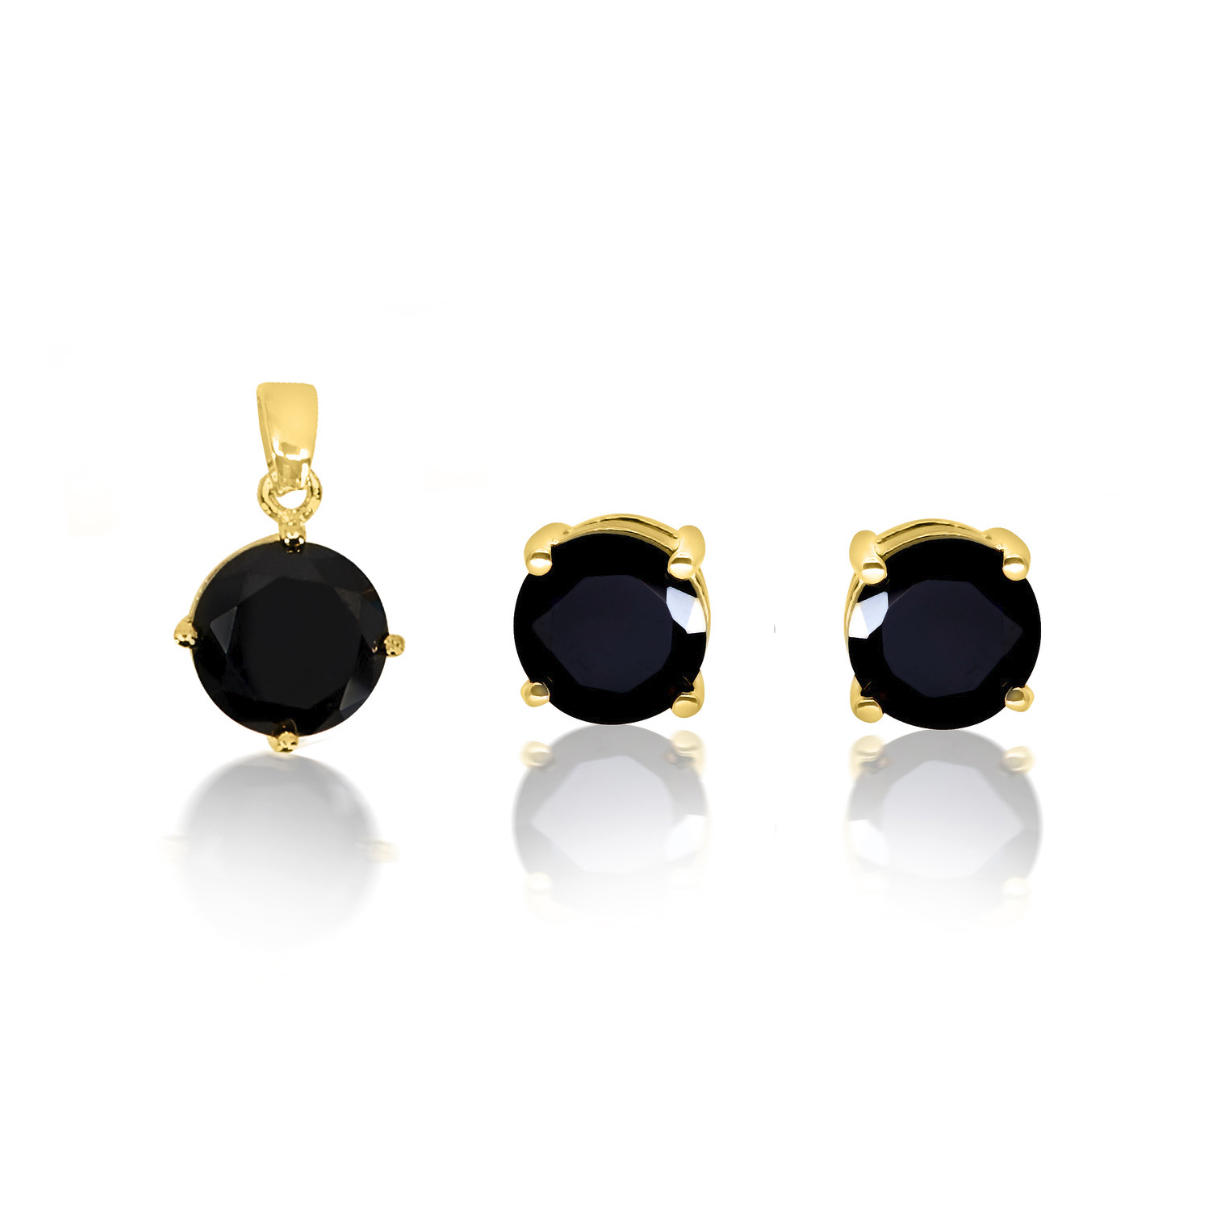 4CT Gold Filled High Polish Finsh Genuine Black ROUND Set Charm And Earrings